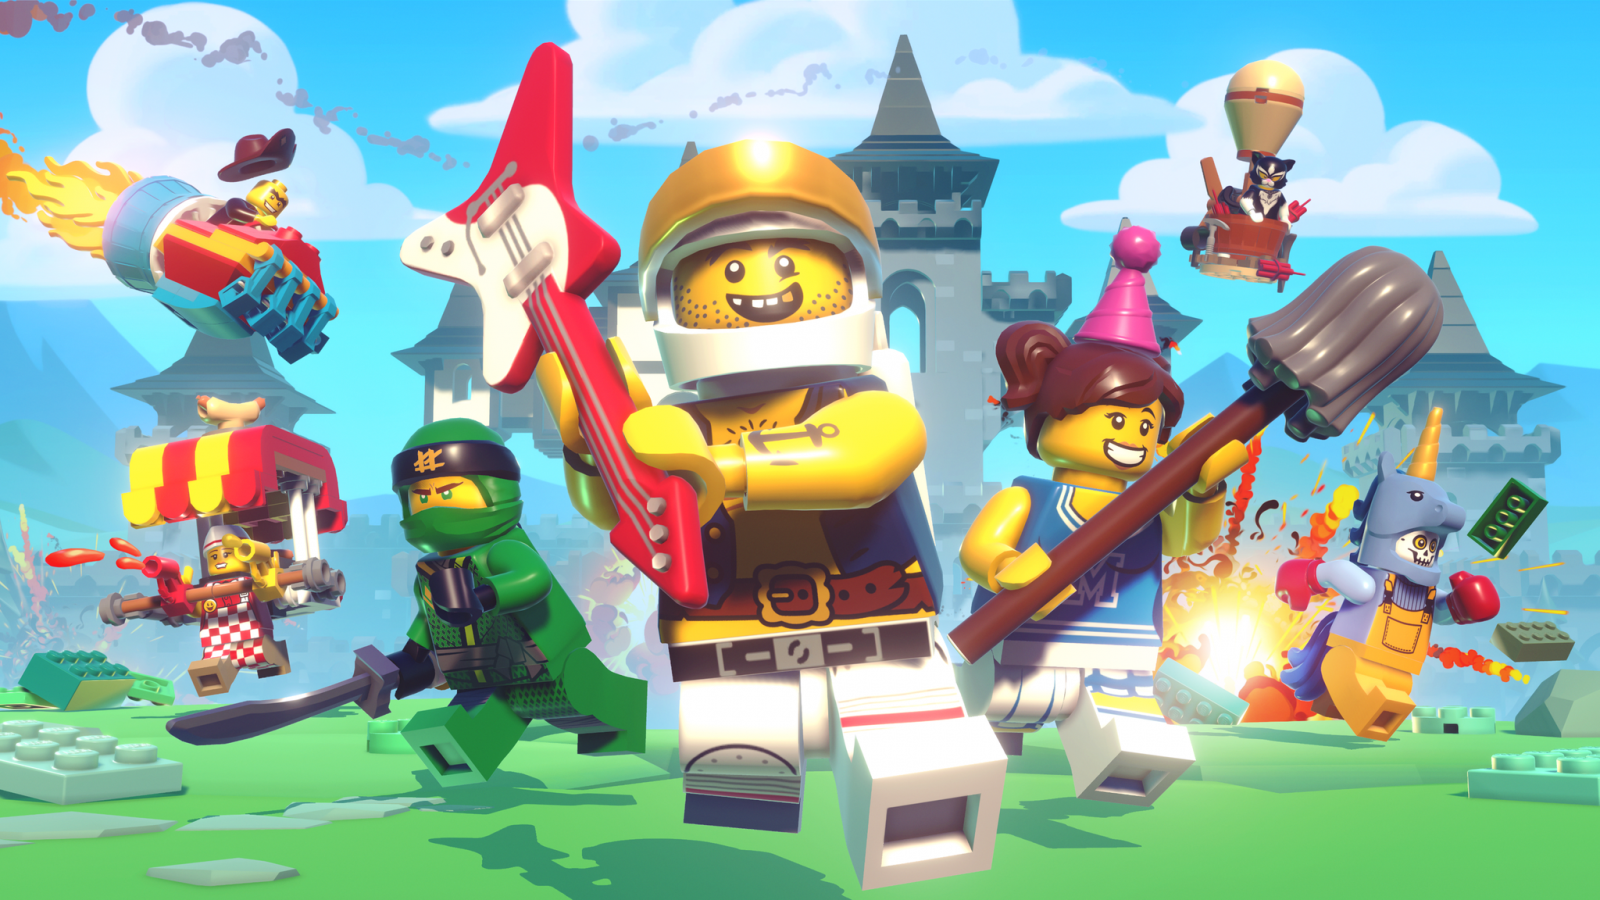 LEGO Brawls now available exclusively for Apple Arcade – GAMING TREND